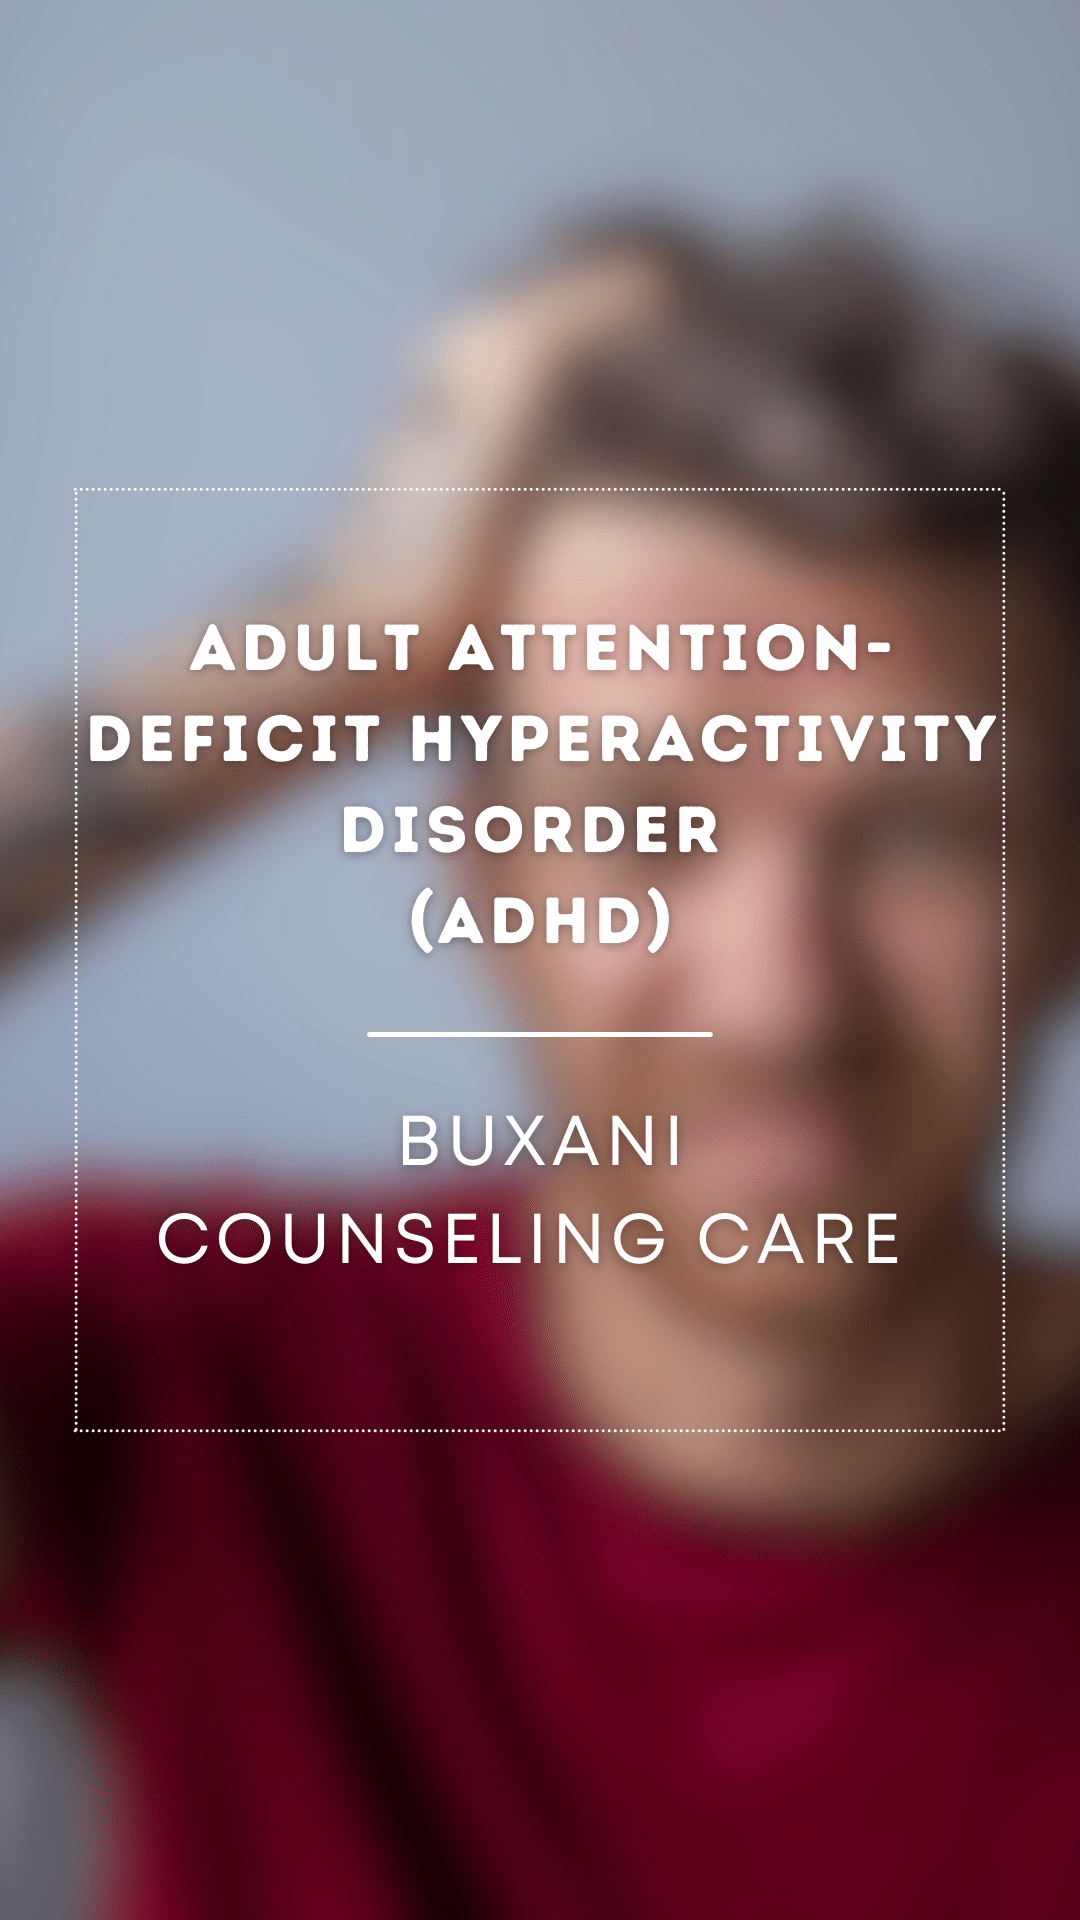 Adult Attention-Deficit Hyperactivity Disorder (ADHD)